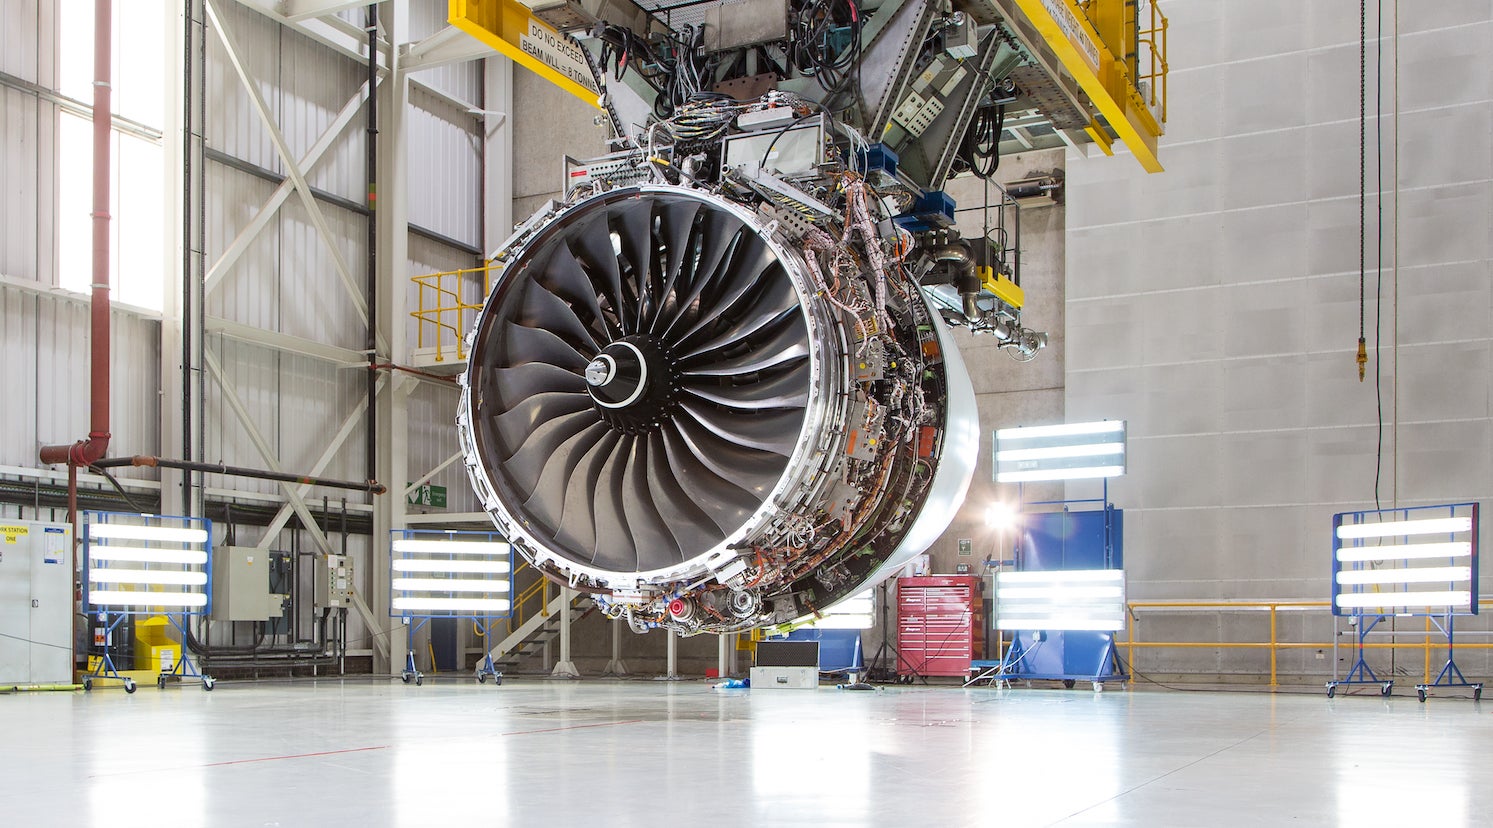 A Trent XWB jet engine hanging in an aircraft hanger.